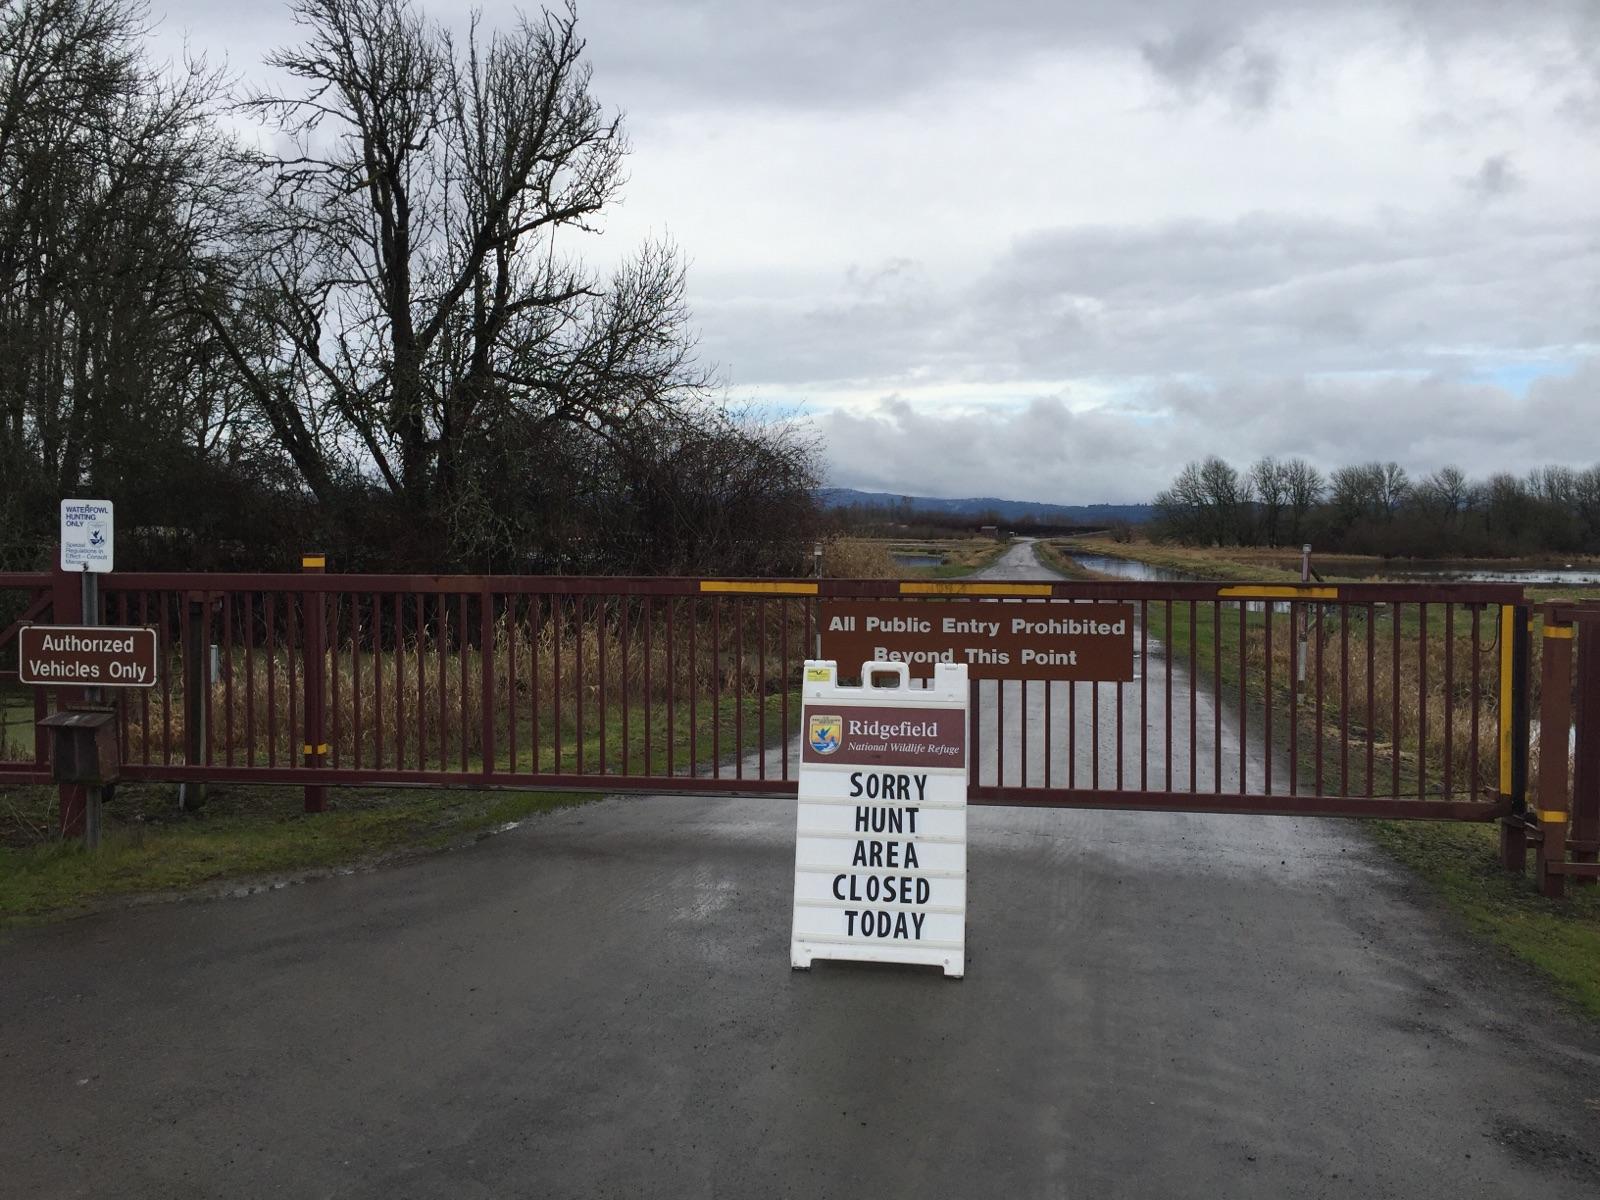 The hunting area is closed today at the Ridgefield Wildlife Refuge.